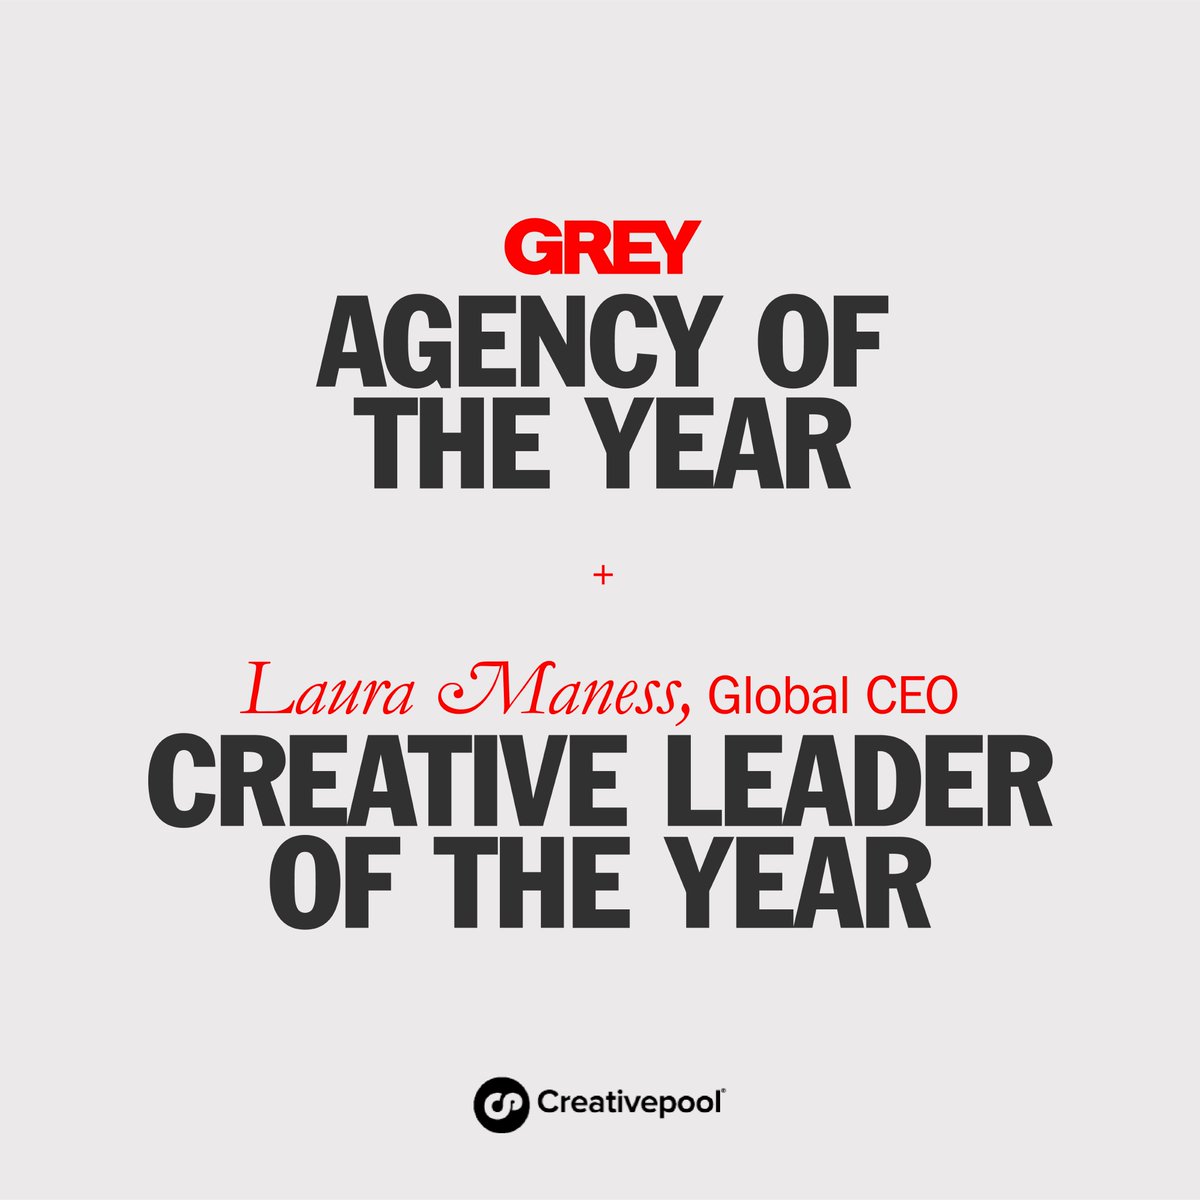 We are thrilled to announce Grey was awarded Agency of the Year at this year’s annual @Creativepool awards. And, @LauraManess, Global CEO has been named Creative Leader of the Year - cementing our position as a creative-powerhouse 🎉 Read more here: bit.ly/3ZeZ5Pr